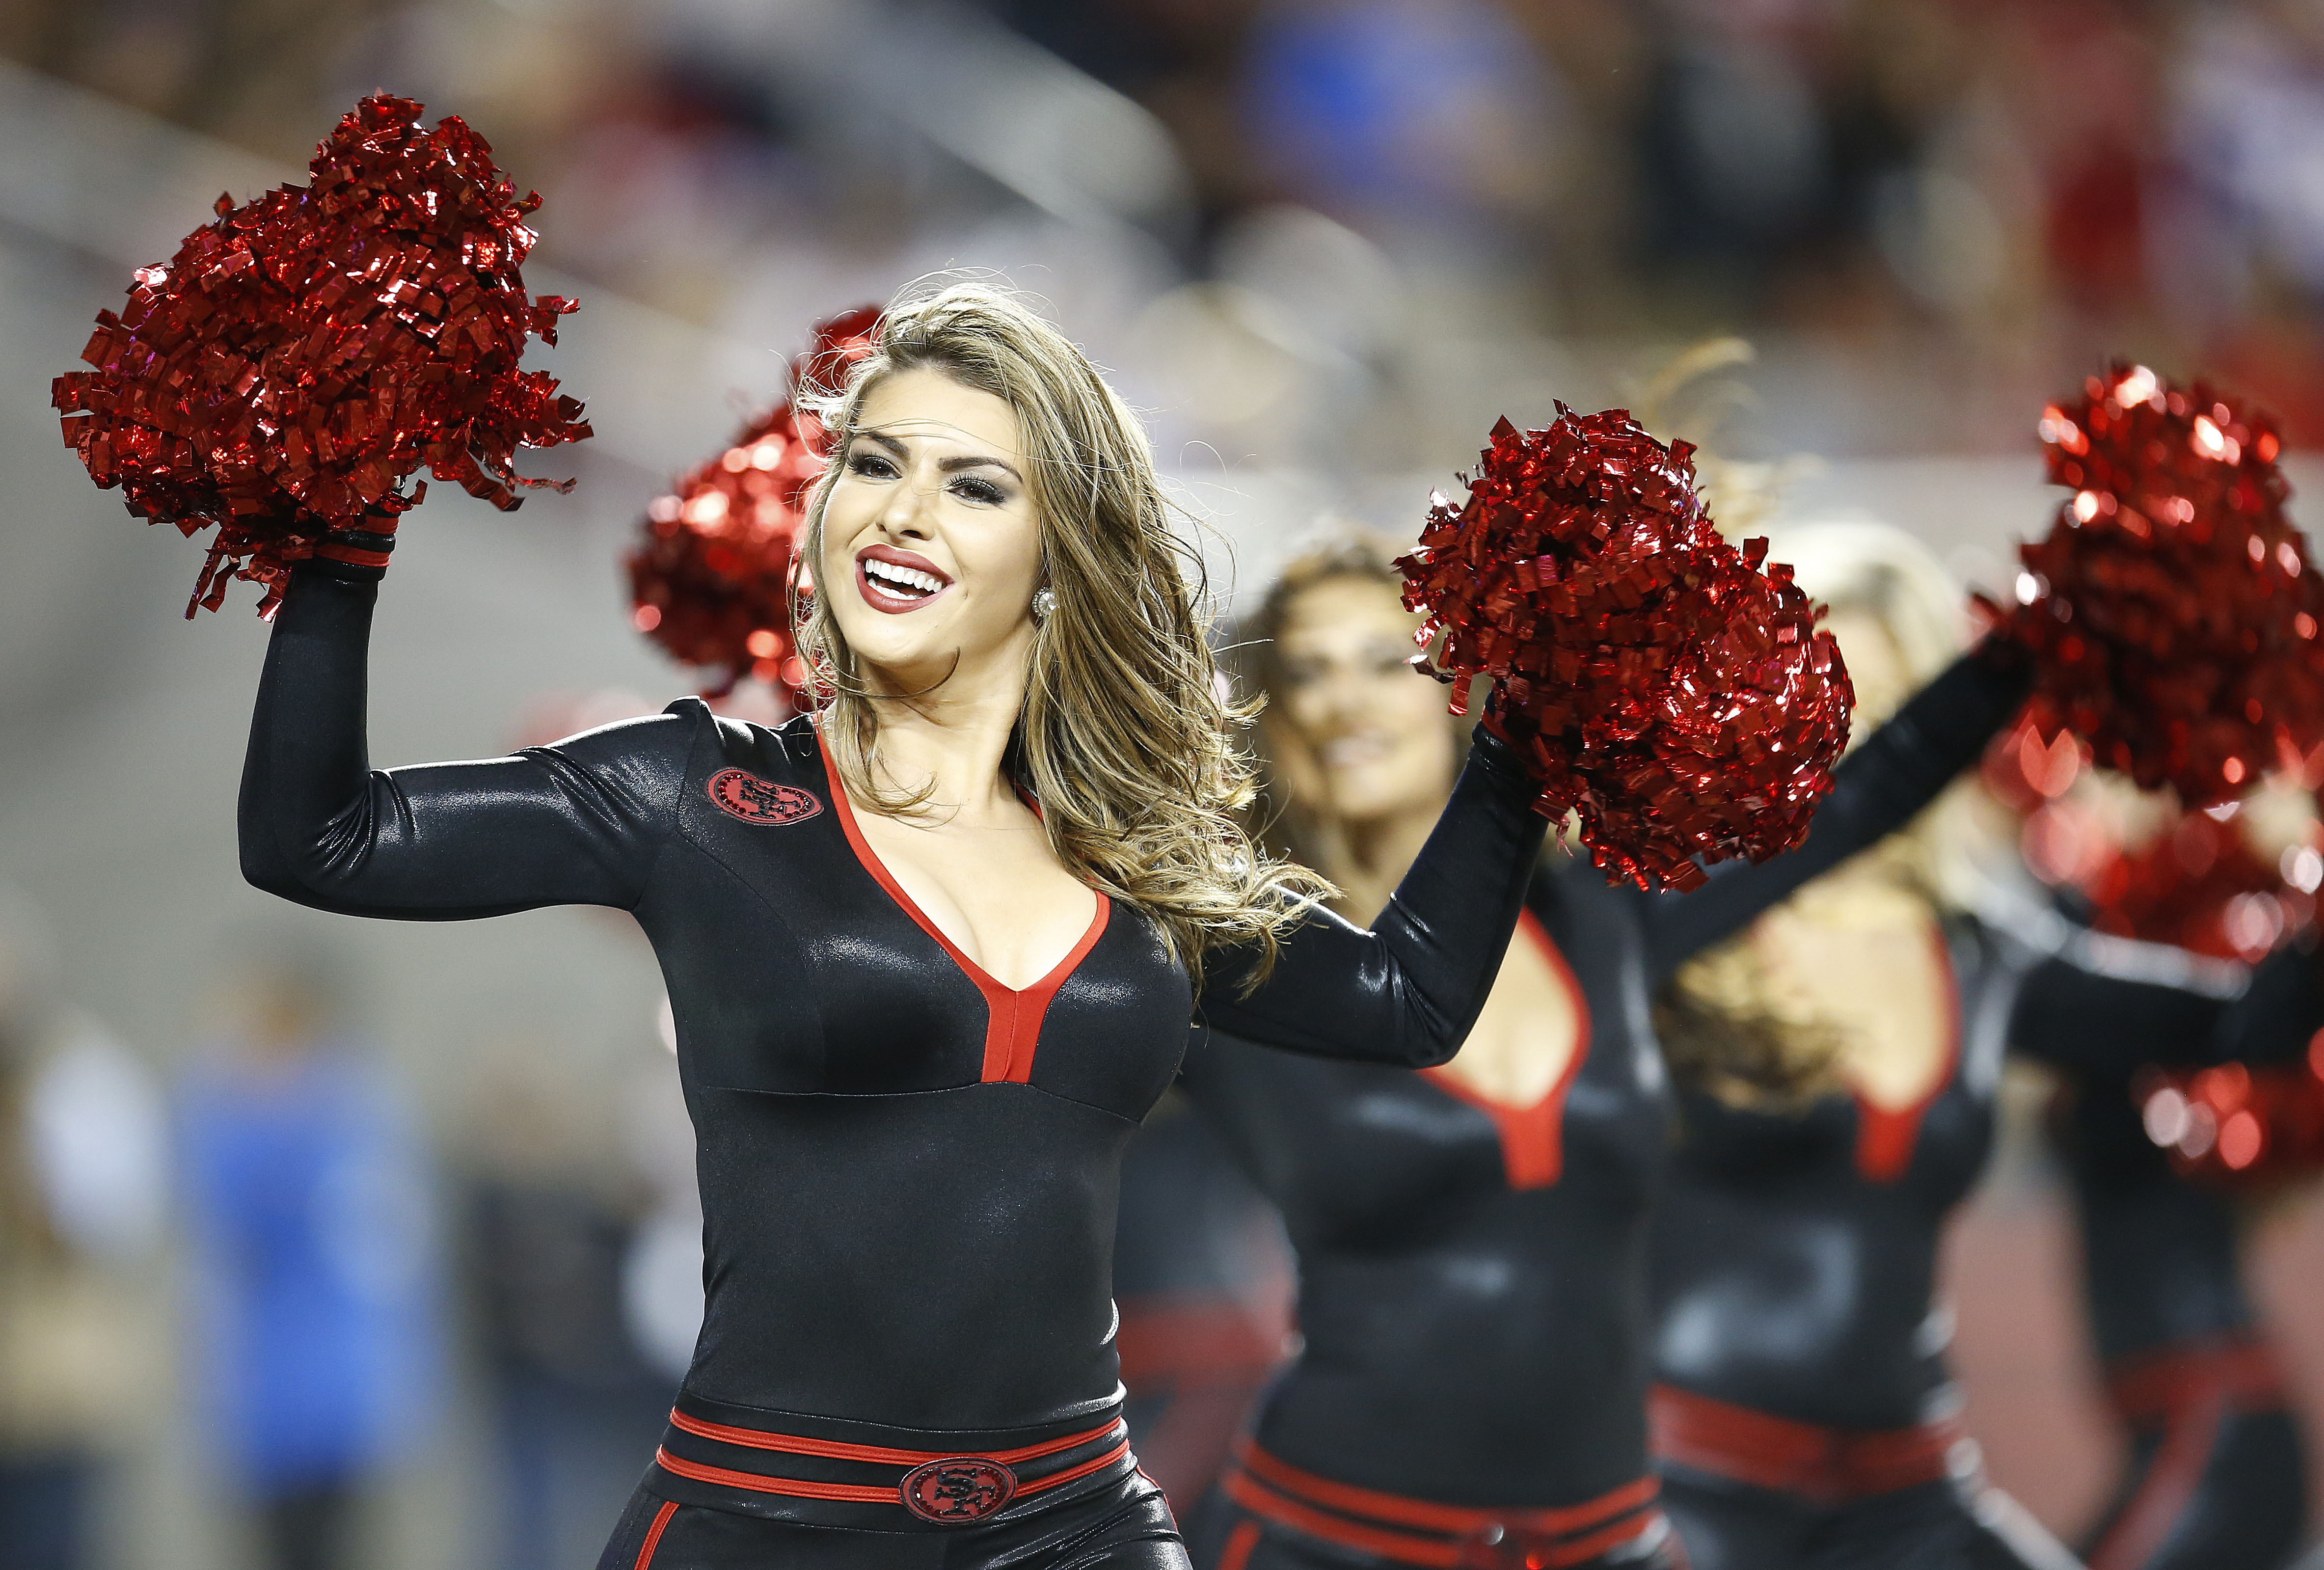 San Francisco 49ers cheerleaders perform during the first half of an NFL football game between the San Francisco 49ers and the Minnesota Vikings in Santa Clara, Calif., Monday, Sept. 14, 2015. (AP Photo/Tony Avelar)